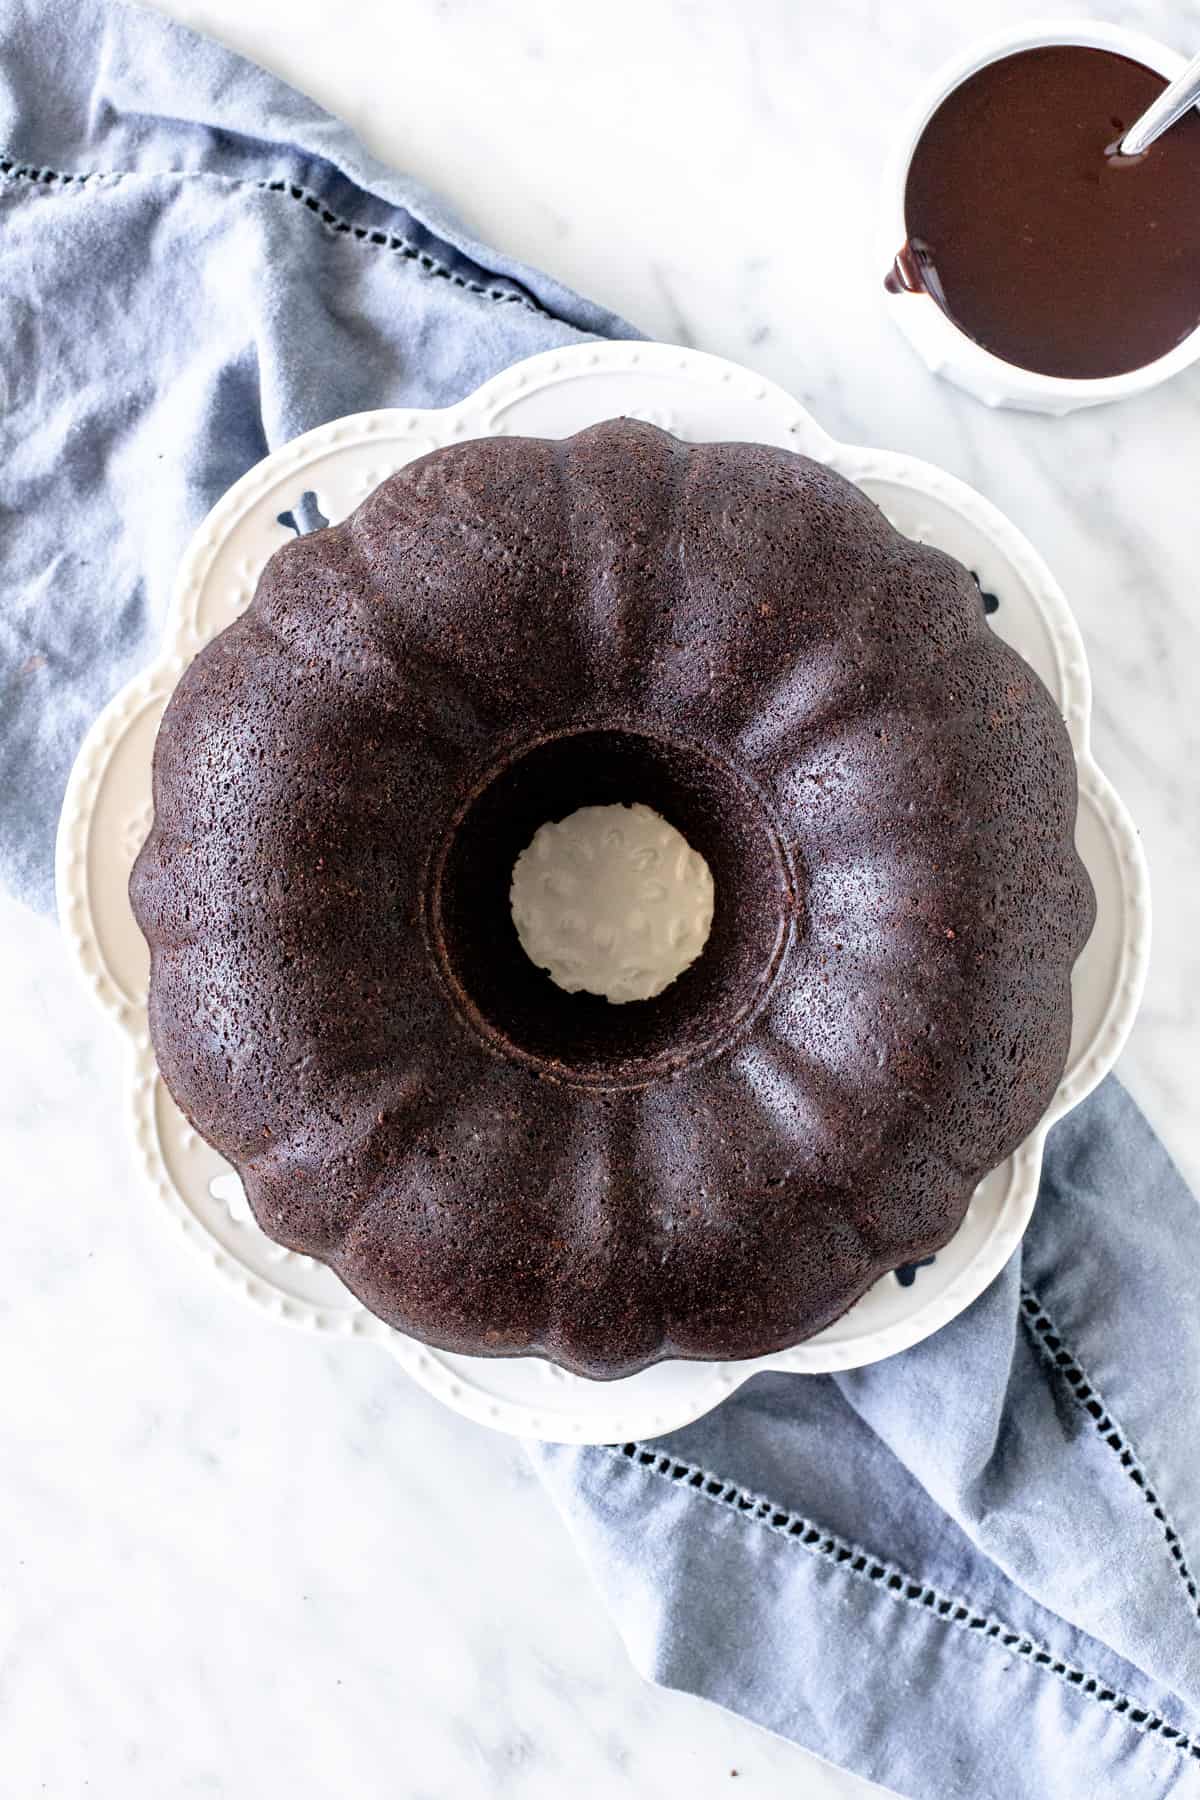 Chocolate cake made in a bundt pan on a plate.